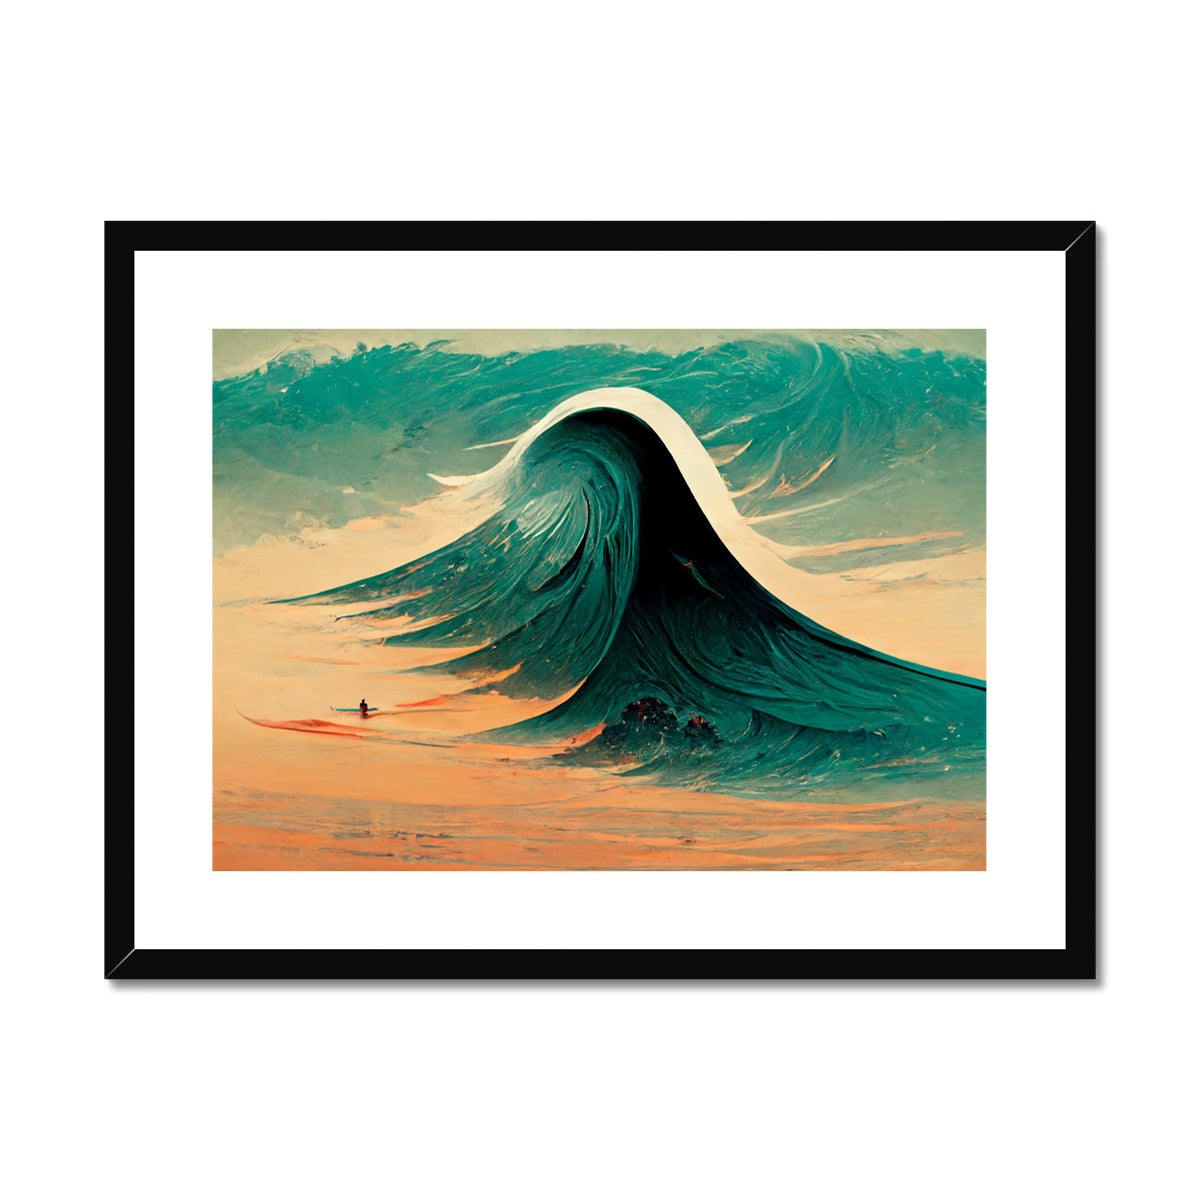 The Swell Framed & Mounted Print